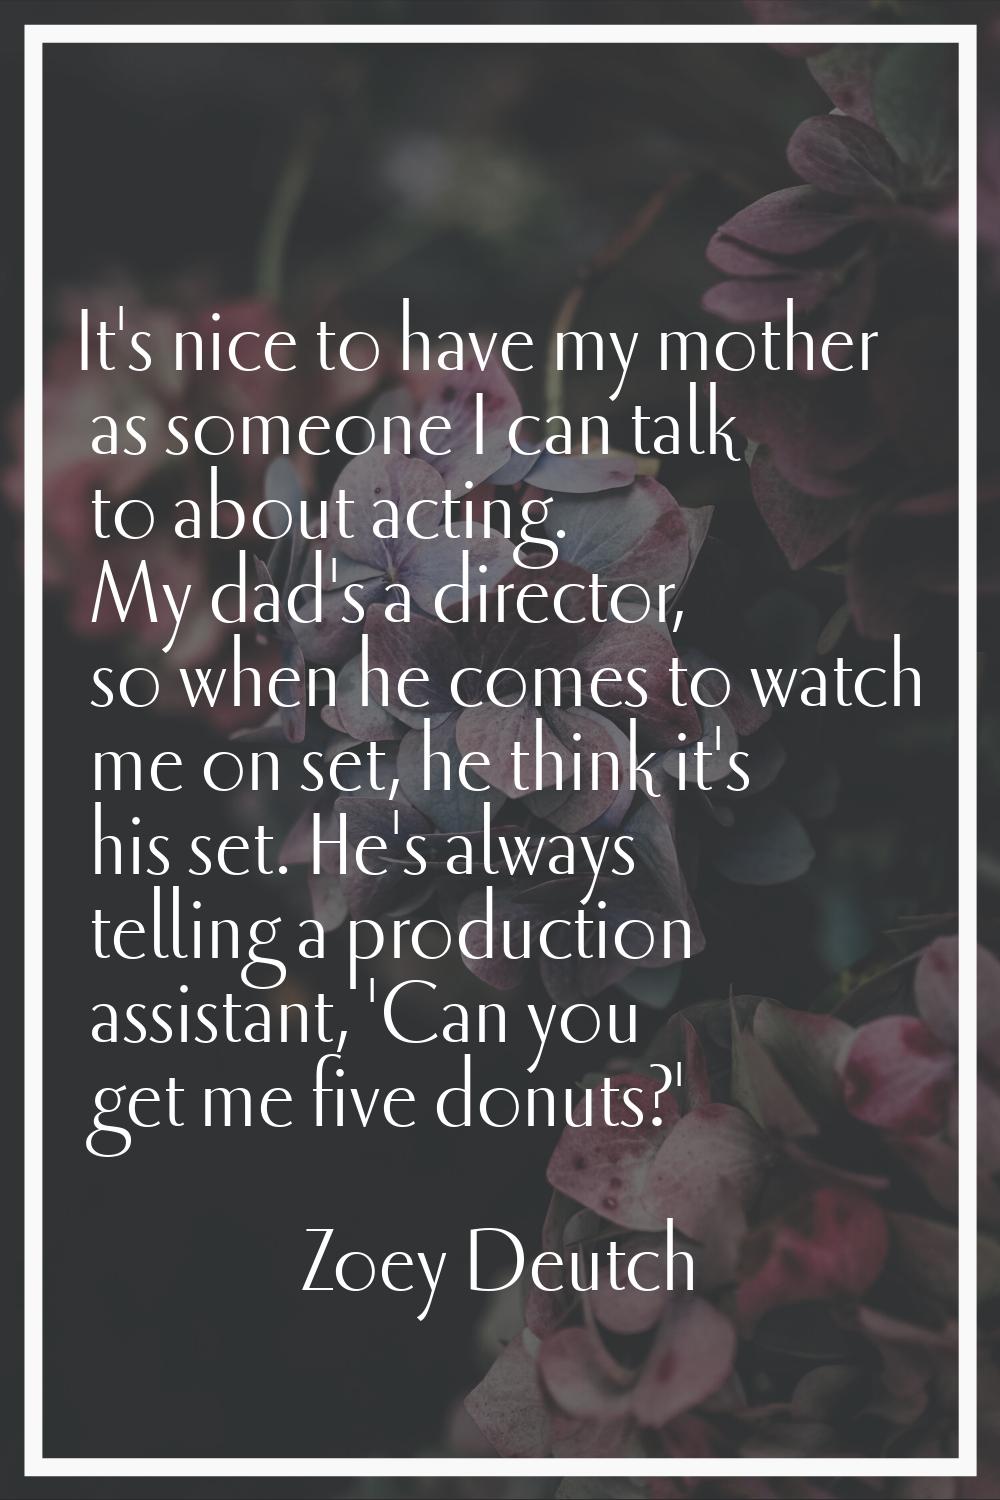 It's nice to have my mother as someone I can talk to about acting. My dad's a director, so when he 